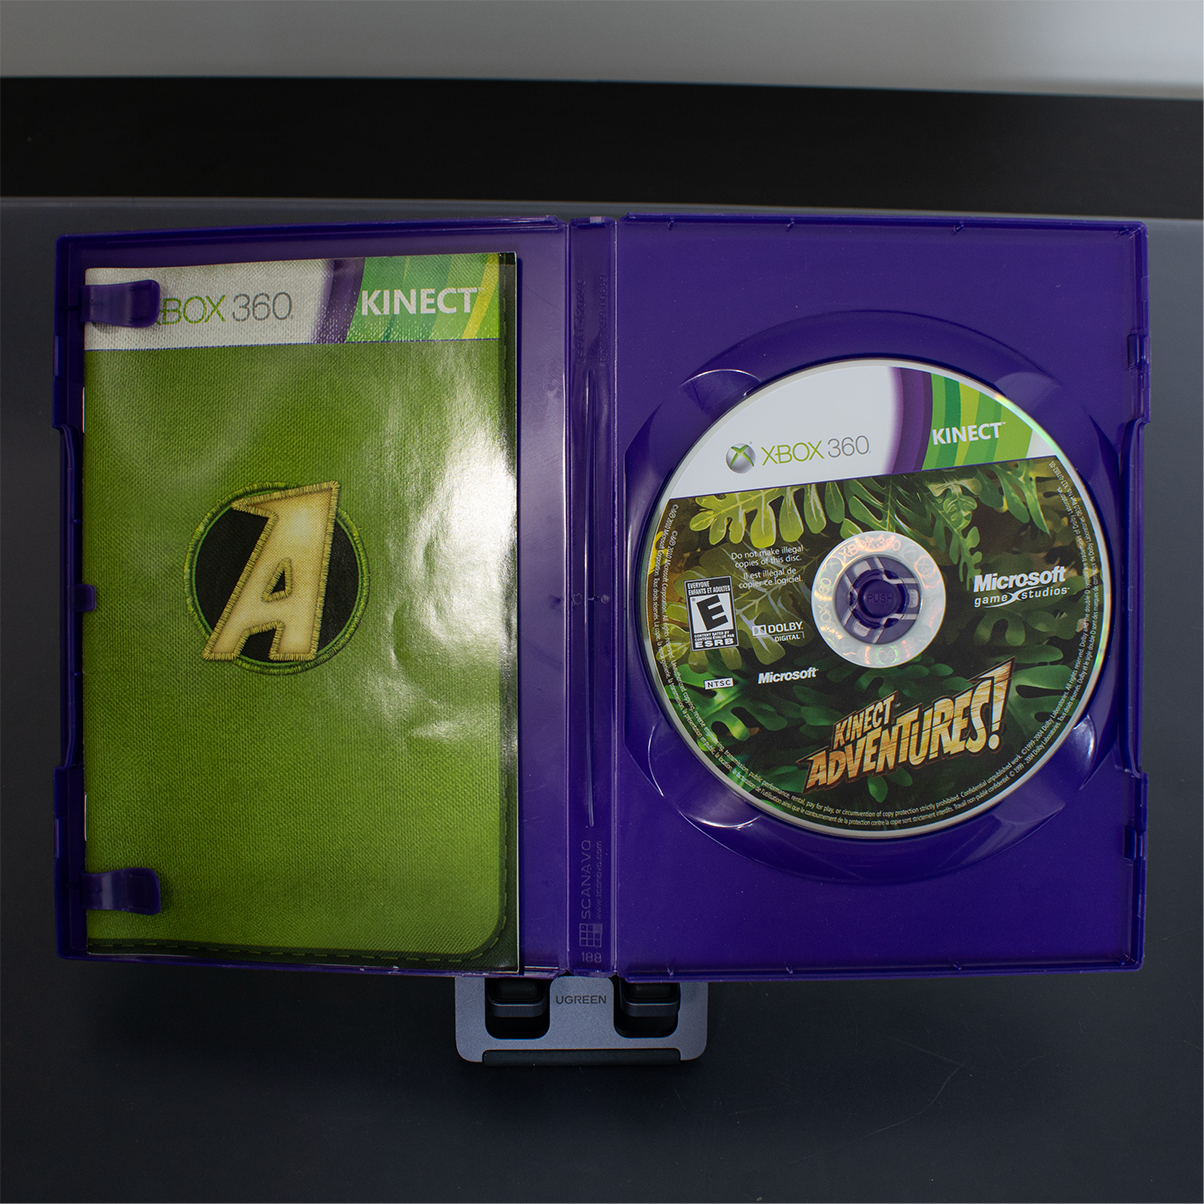 Kinect Adventures! - Xbox 360 Game